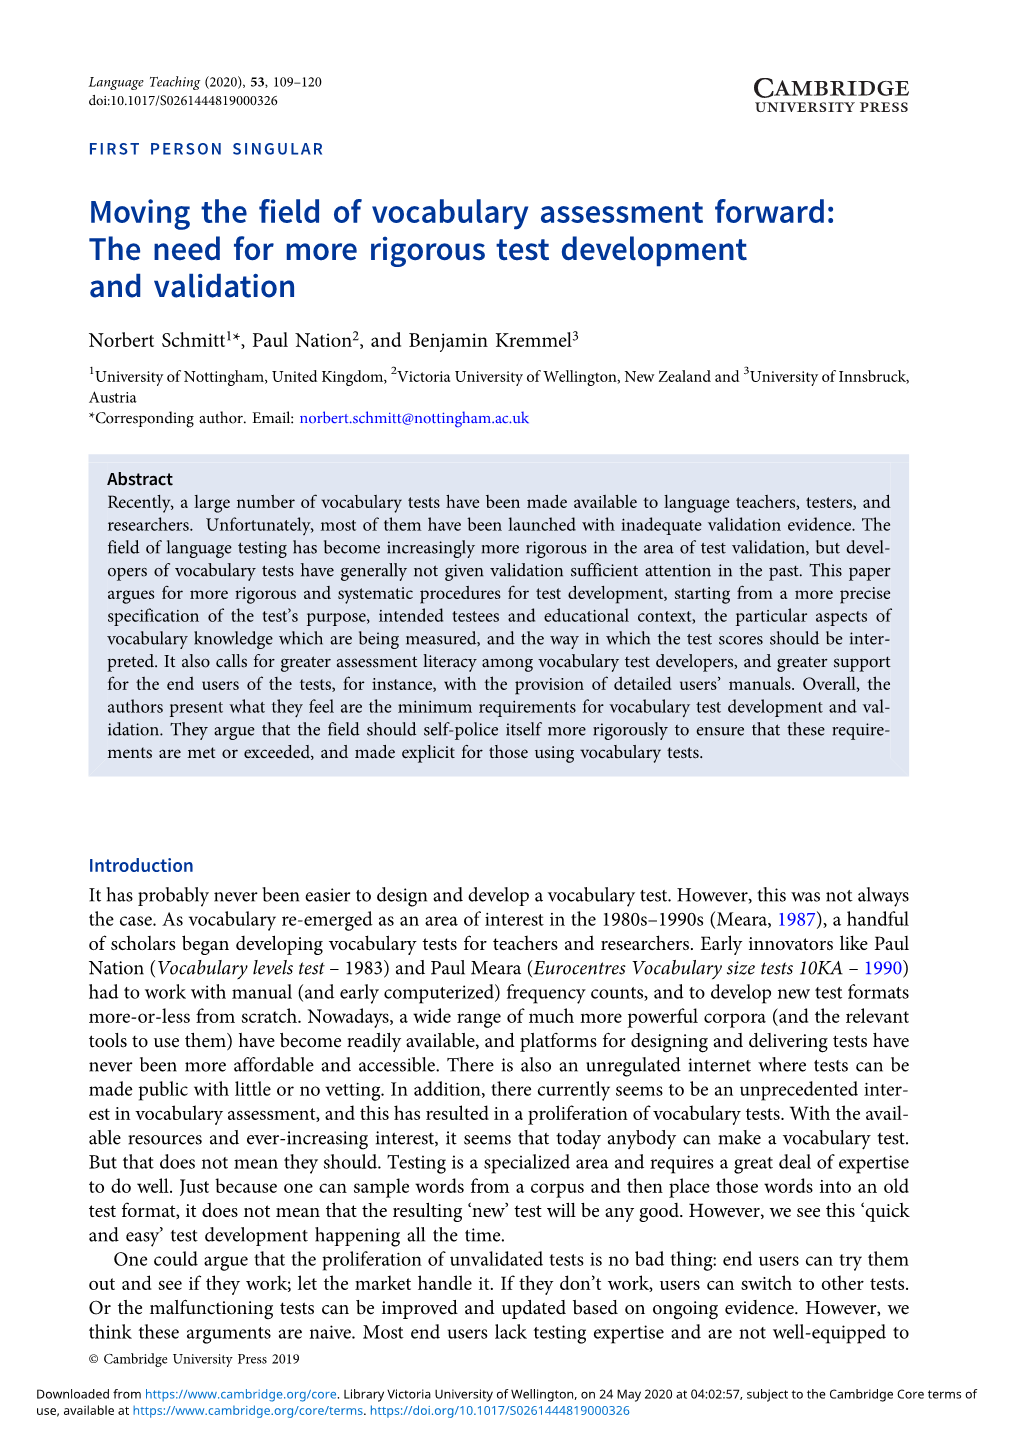 The Need for More Rigorous Test Development and Validation